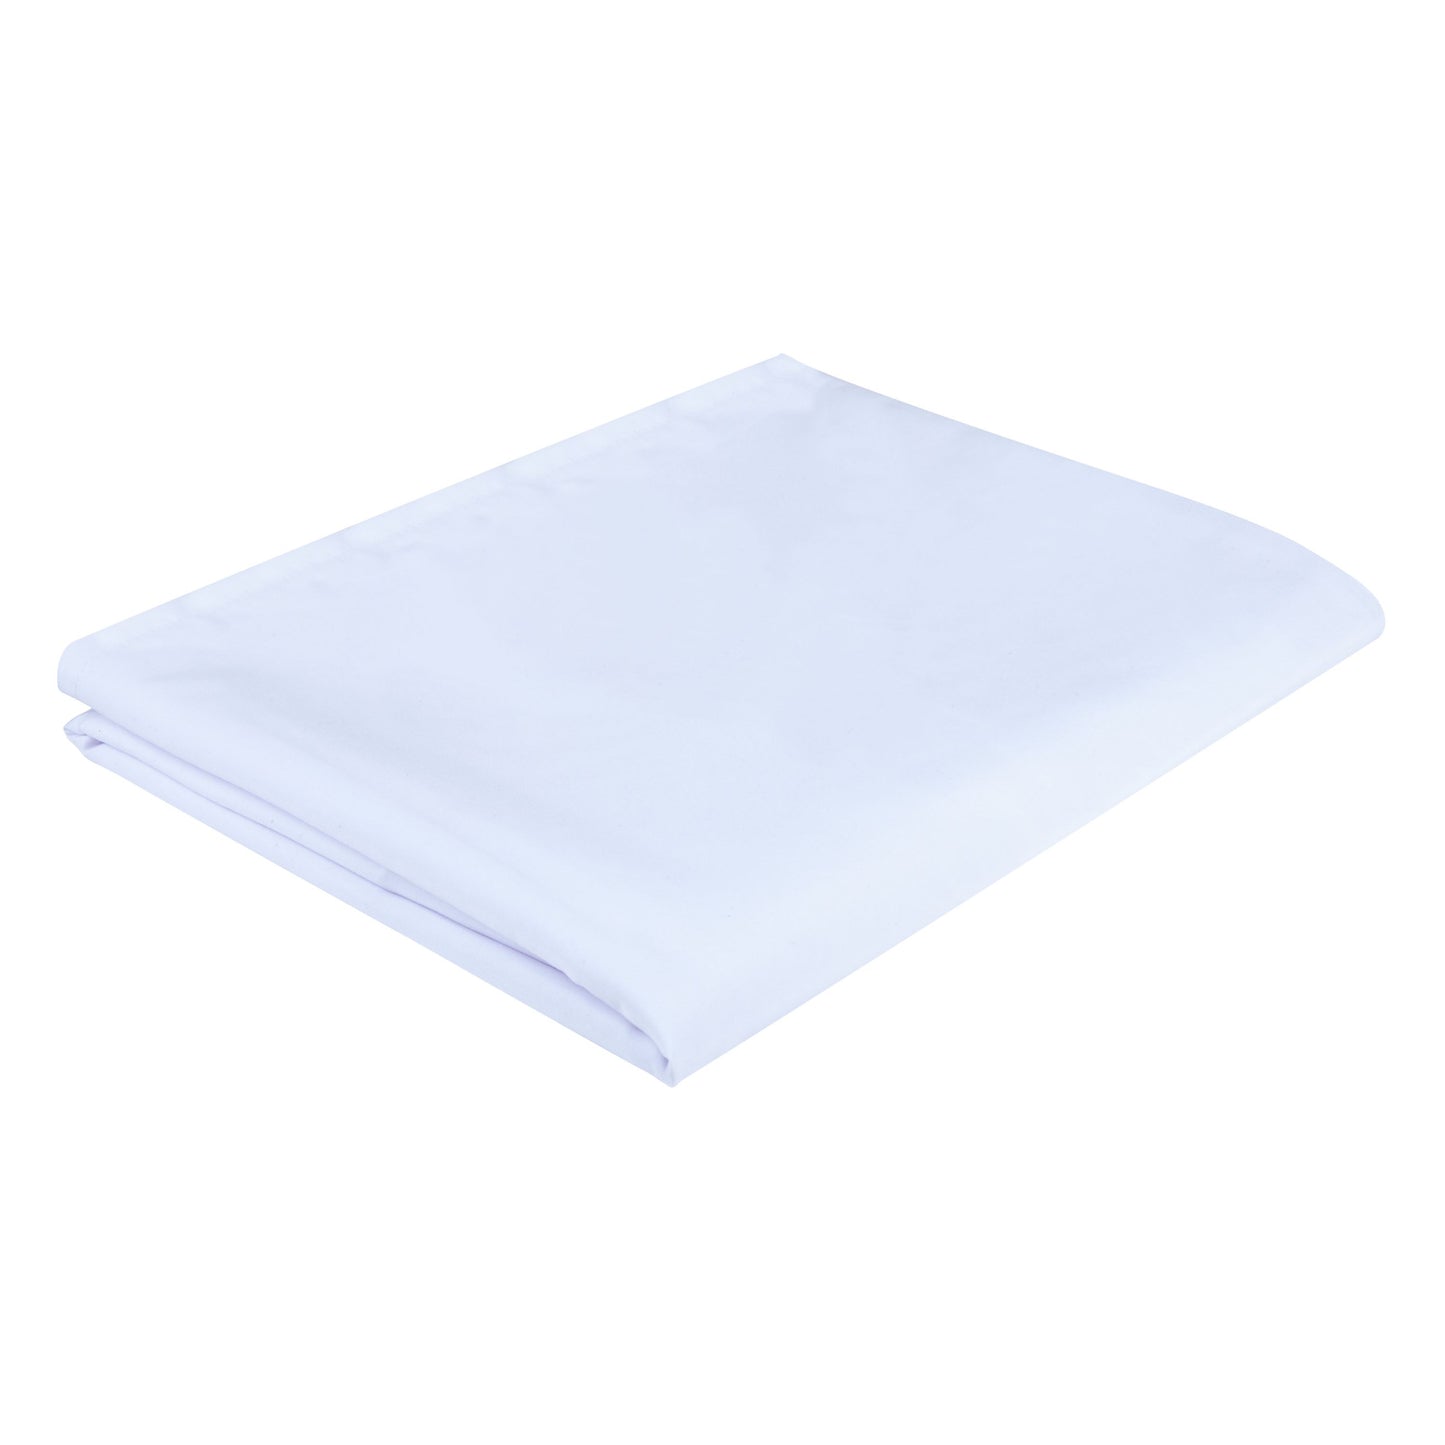 Sheet, Fitted, 130 Thread Count, White